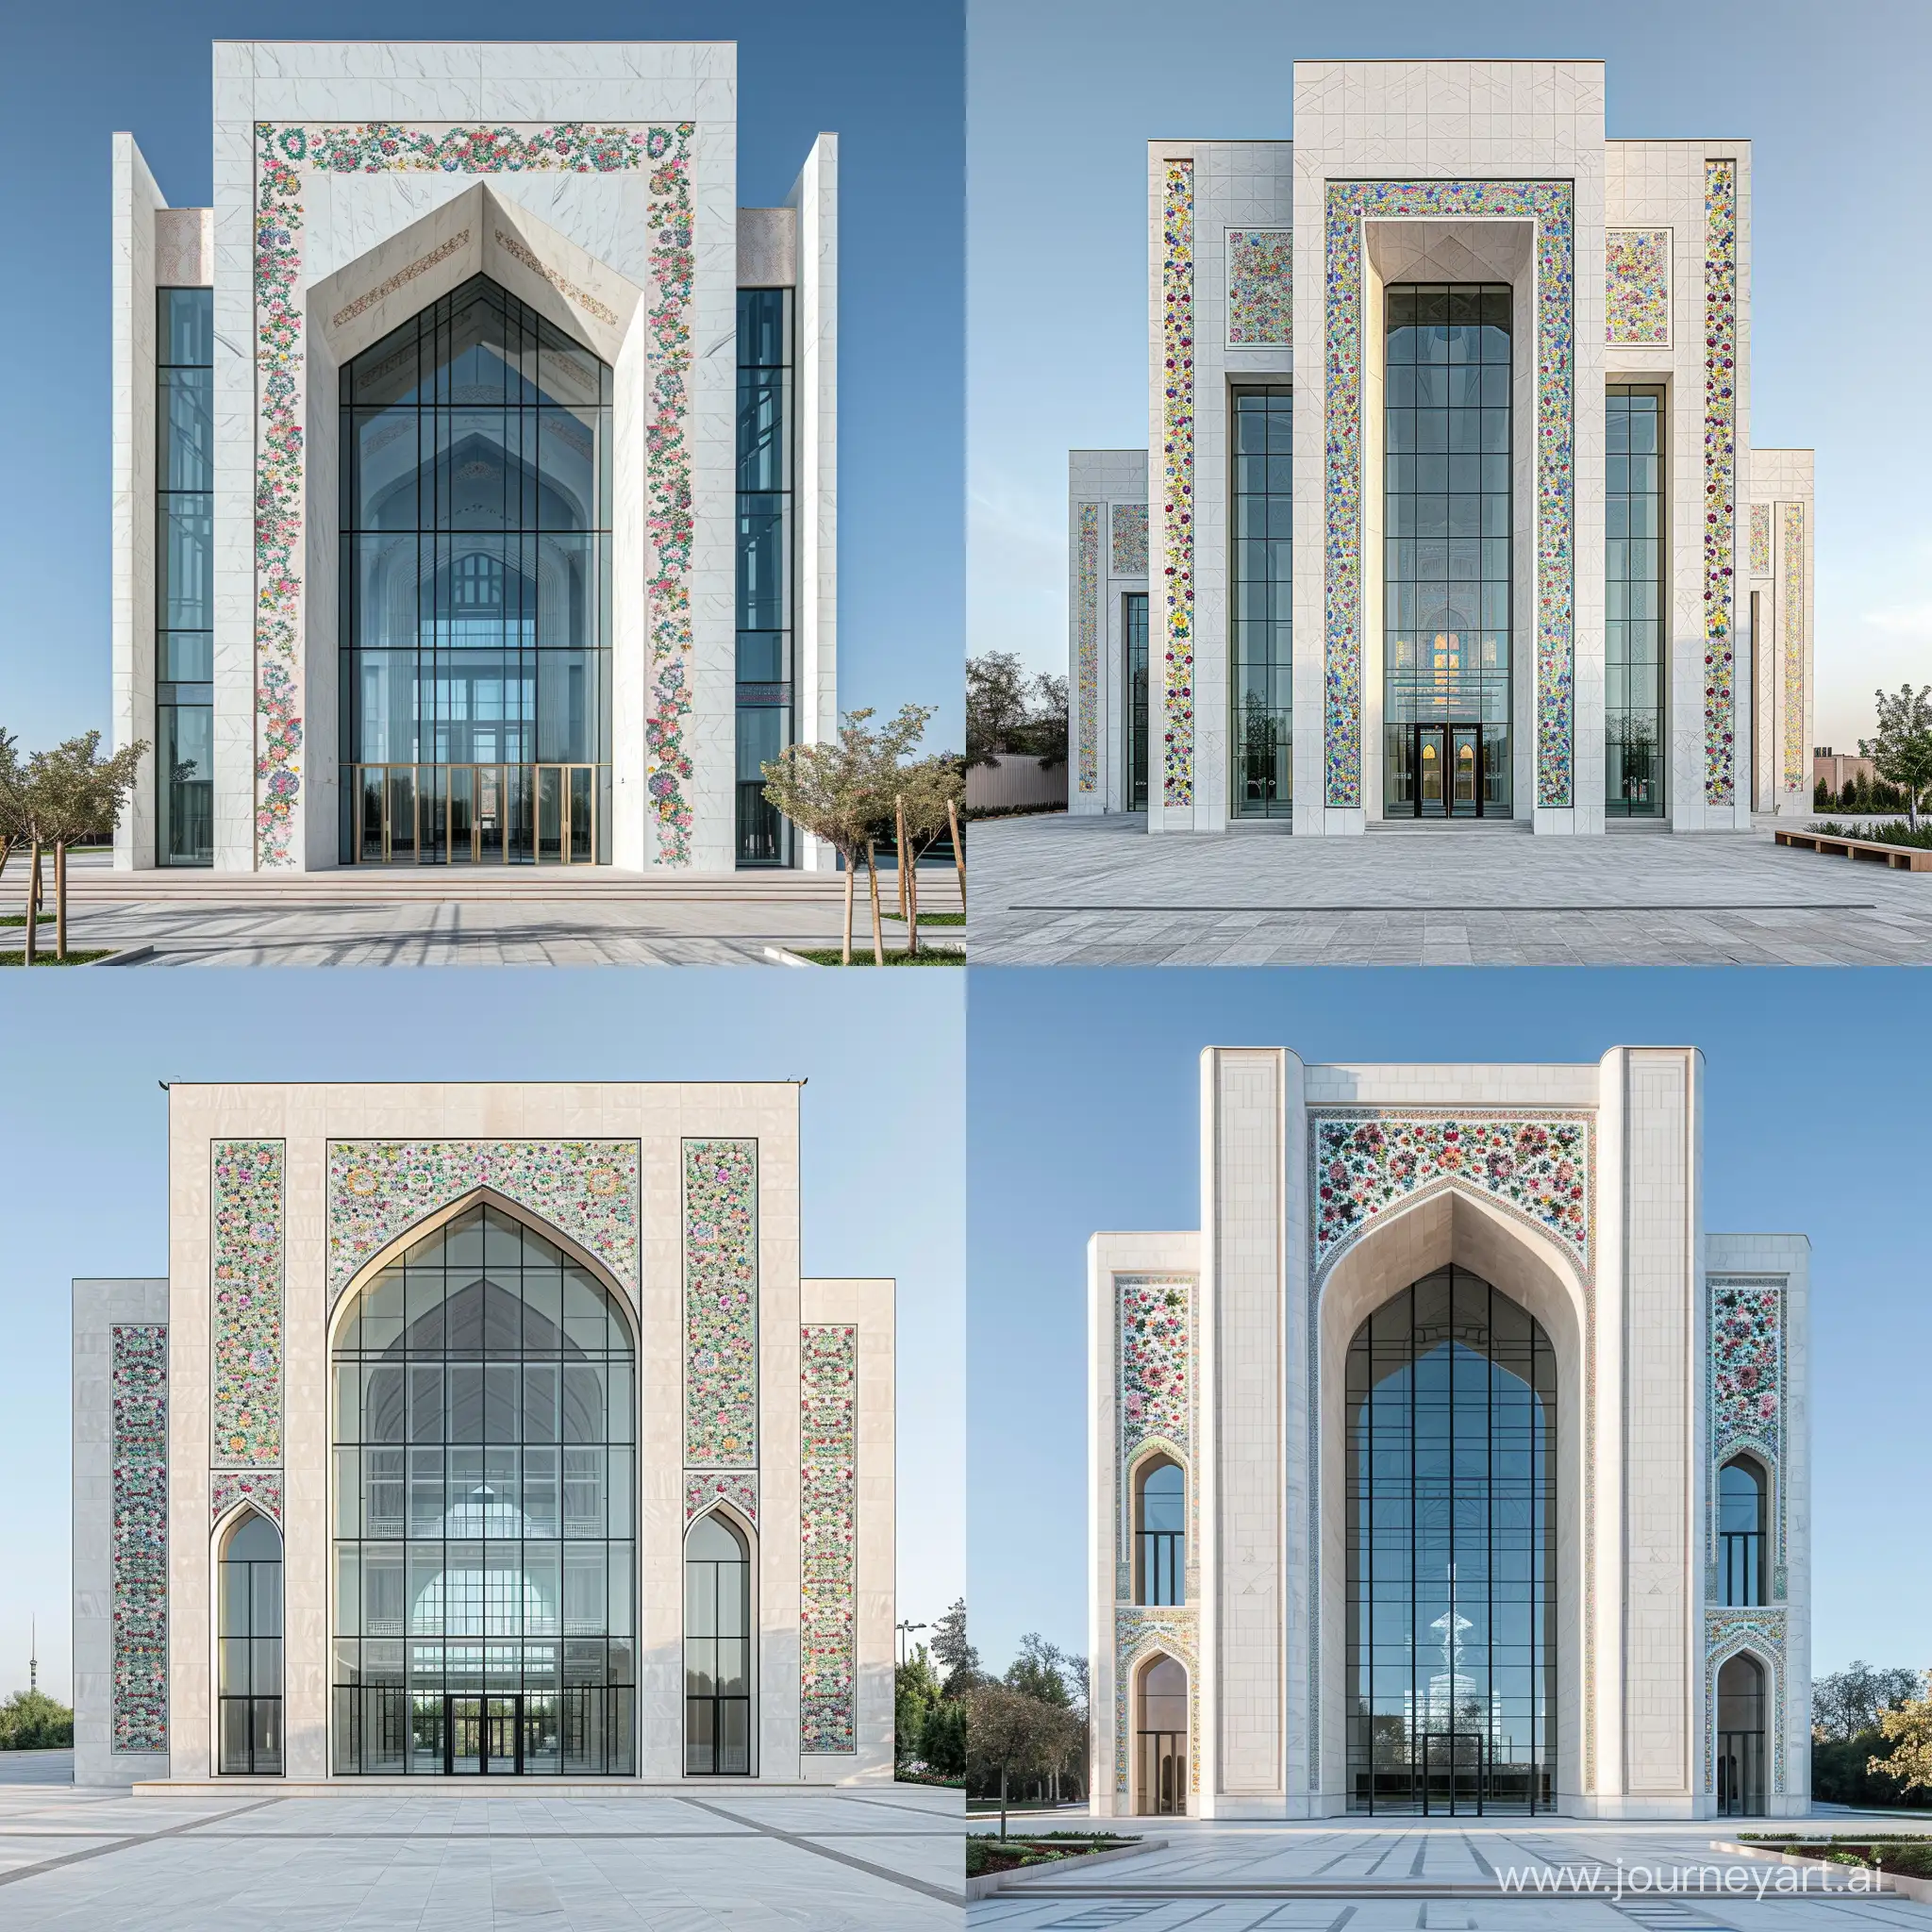 Modern-Uzbekistan-Style-Mosque-with-White-Marbled-Facade-and-Floral-Persian-Tiles